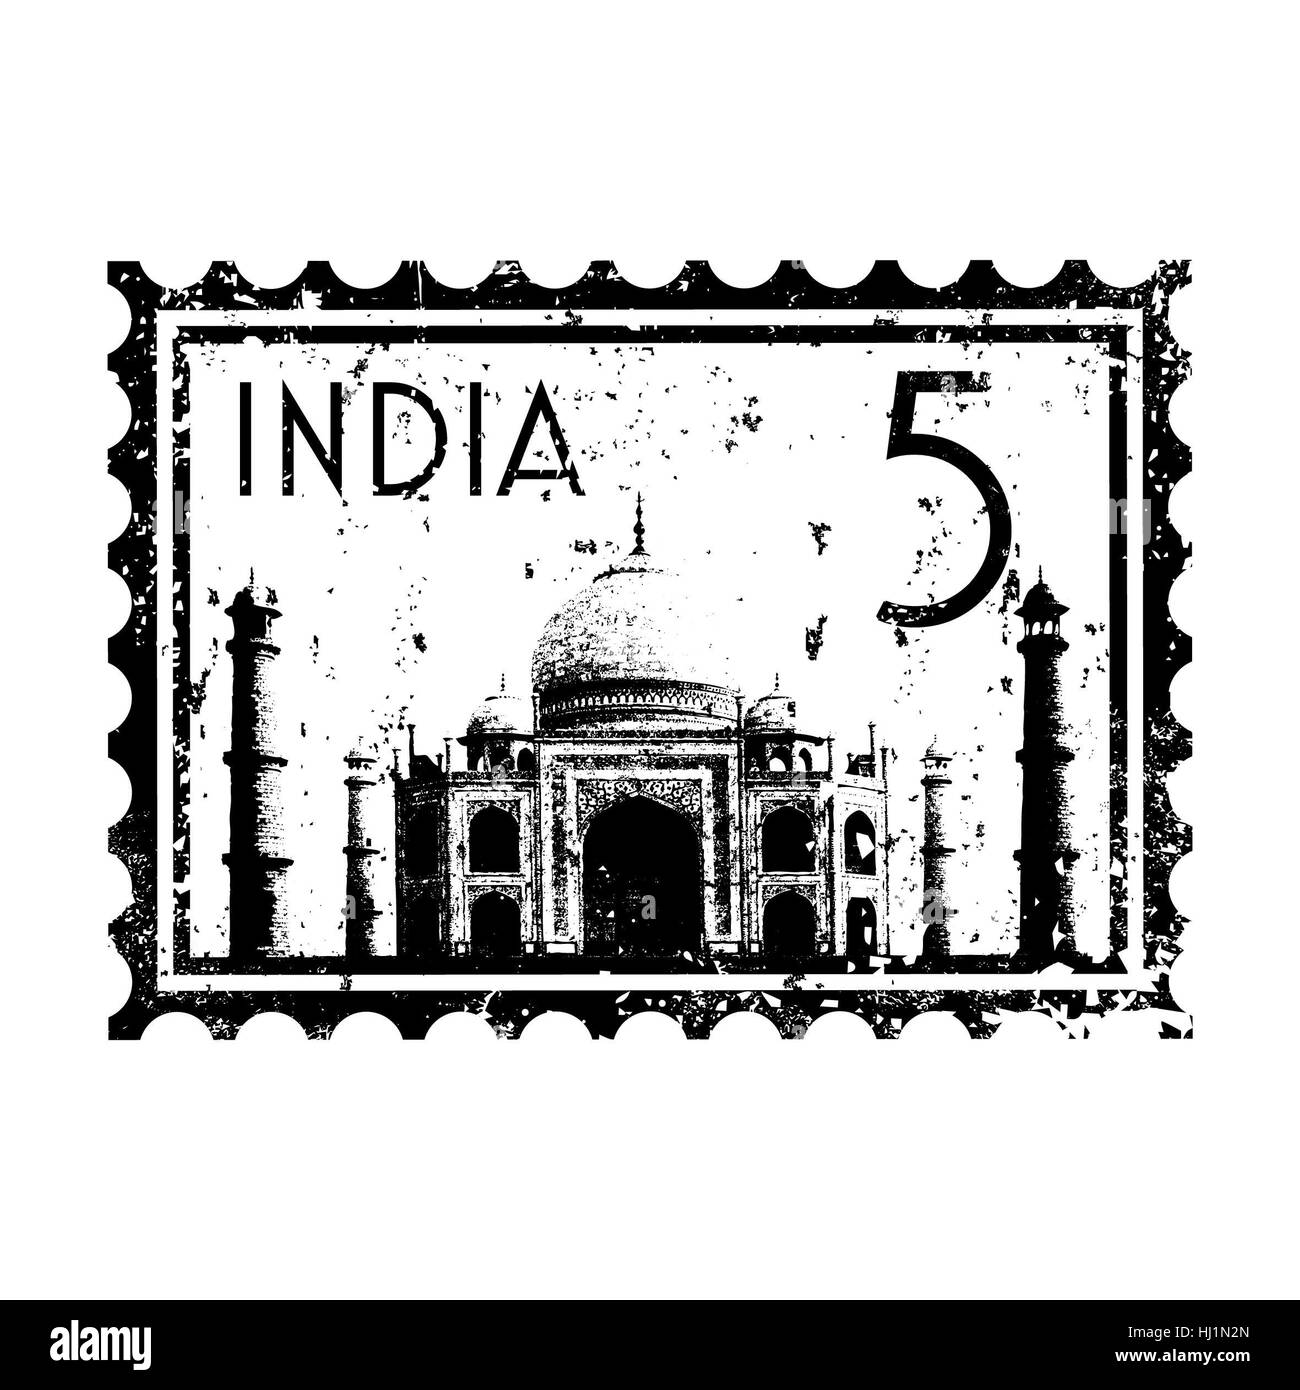 23-12-2013: Buy Gulab Singh Lodhi Indian Postage Stamp - Buy Indian Stamps  - Philacy